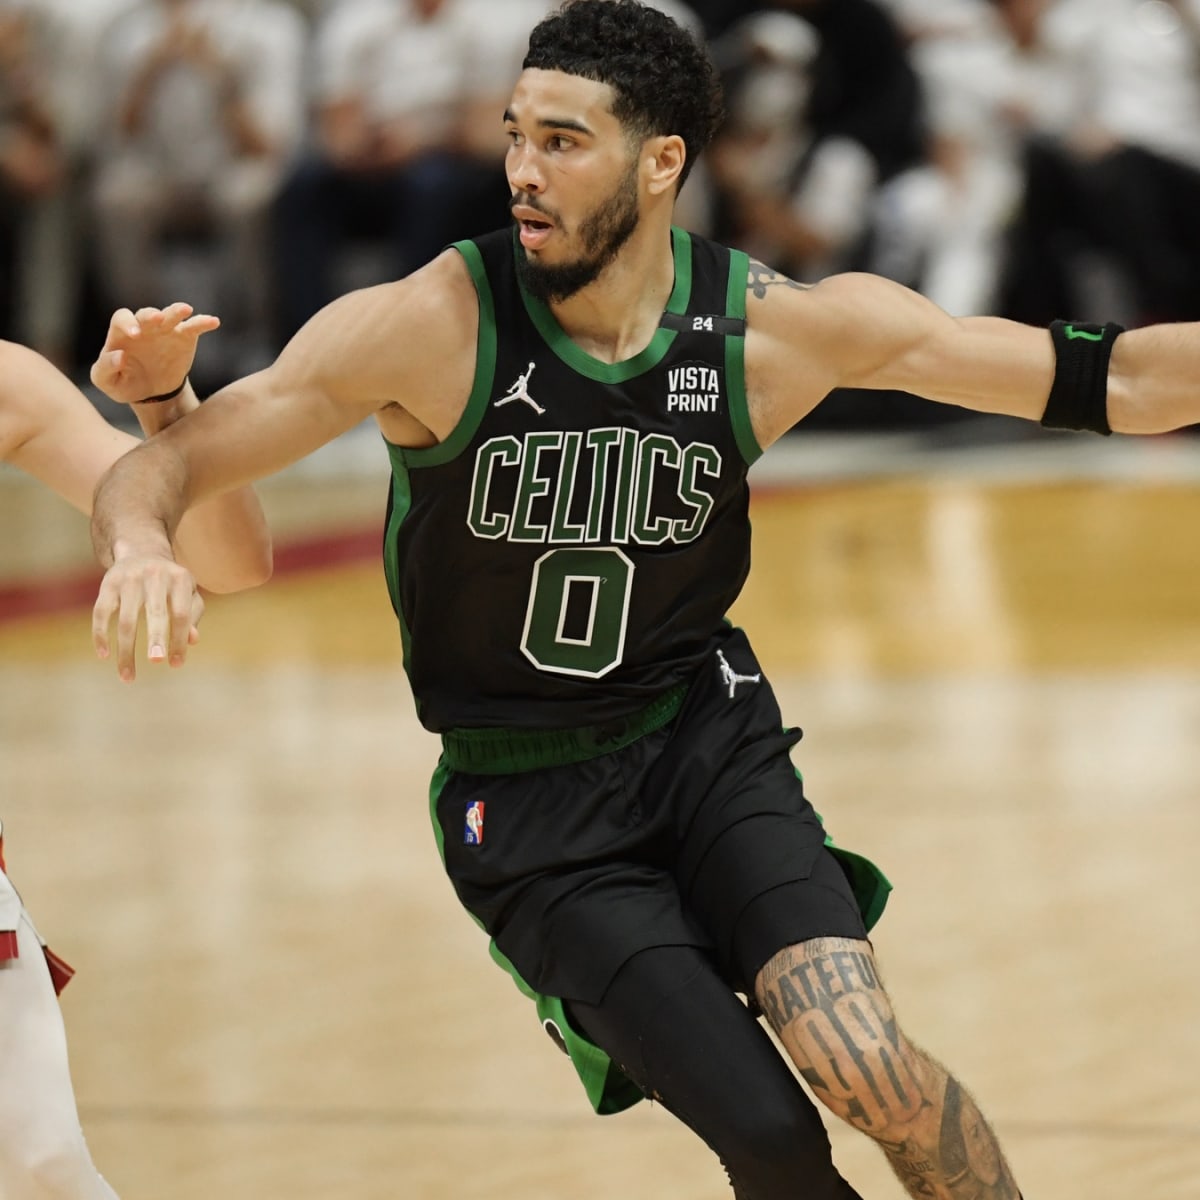 Celtics look to dig out of big hole as East finals resume